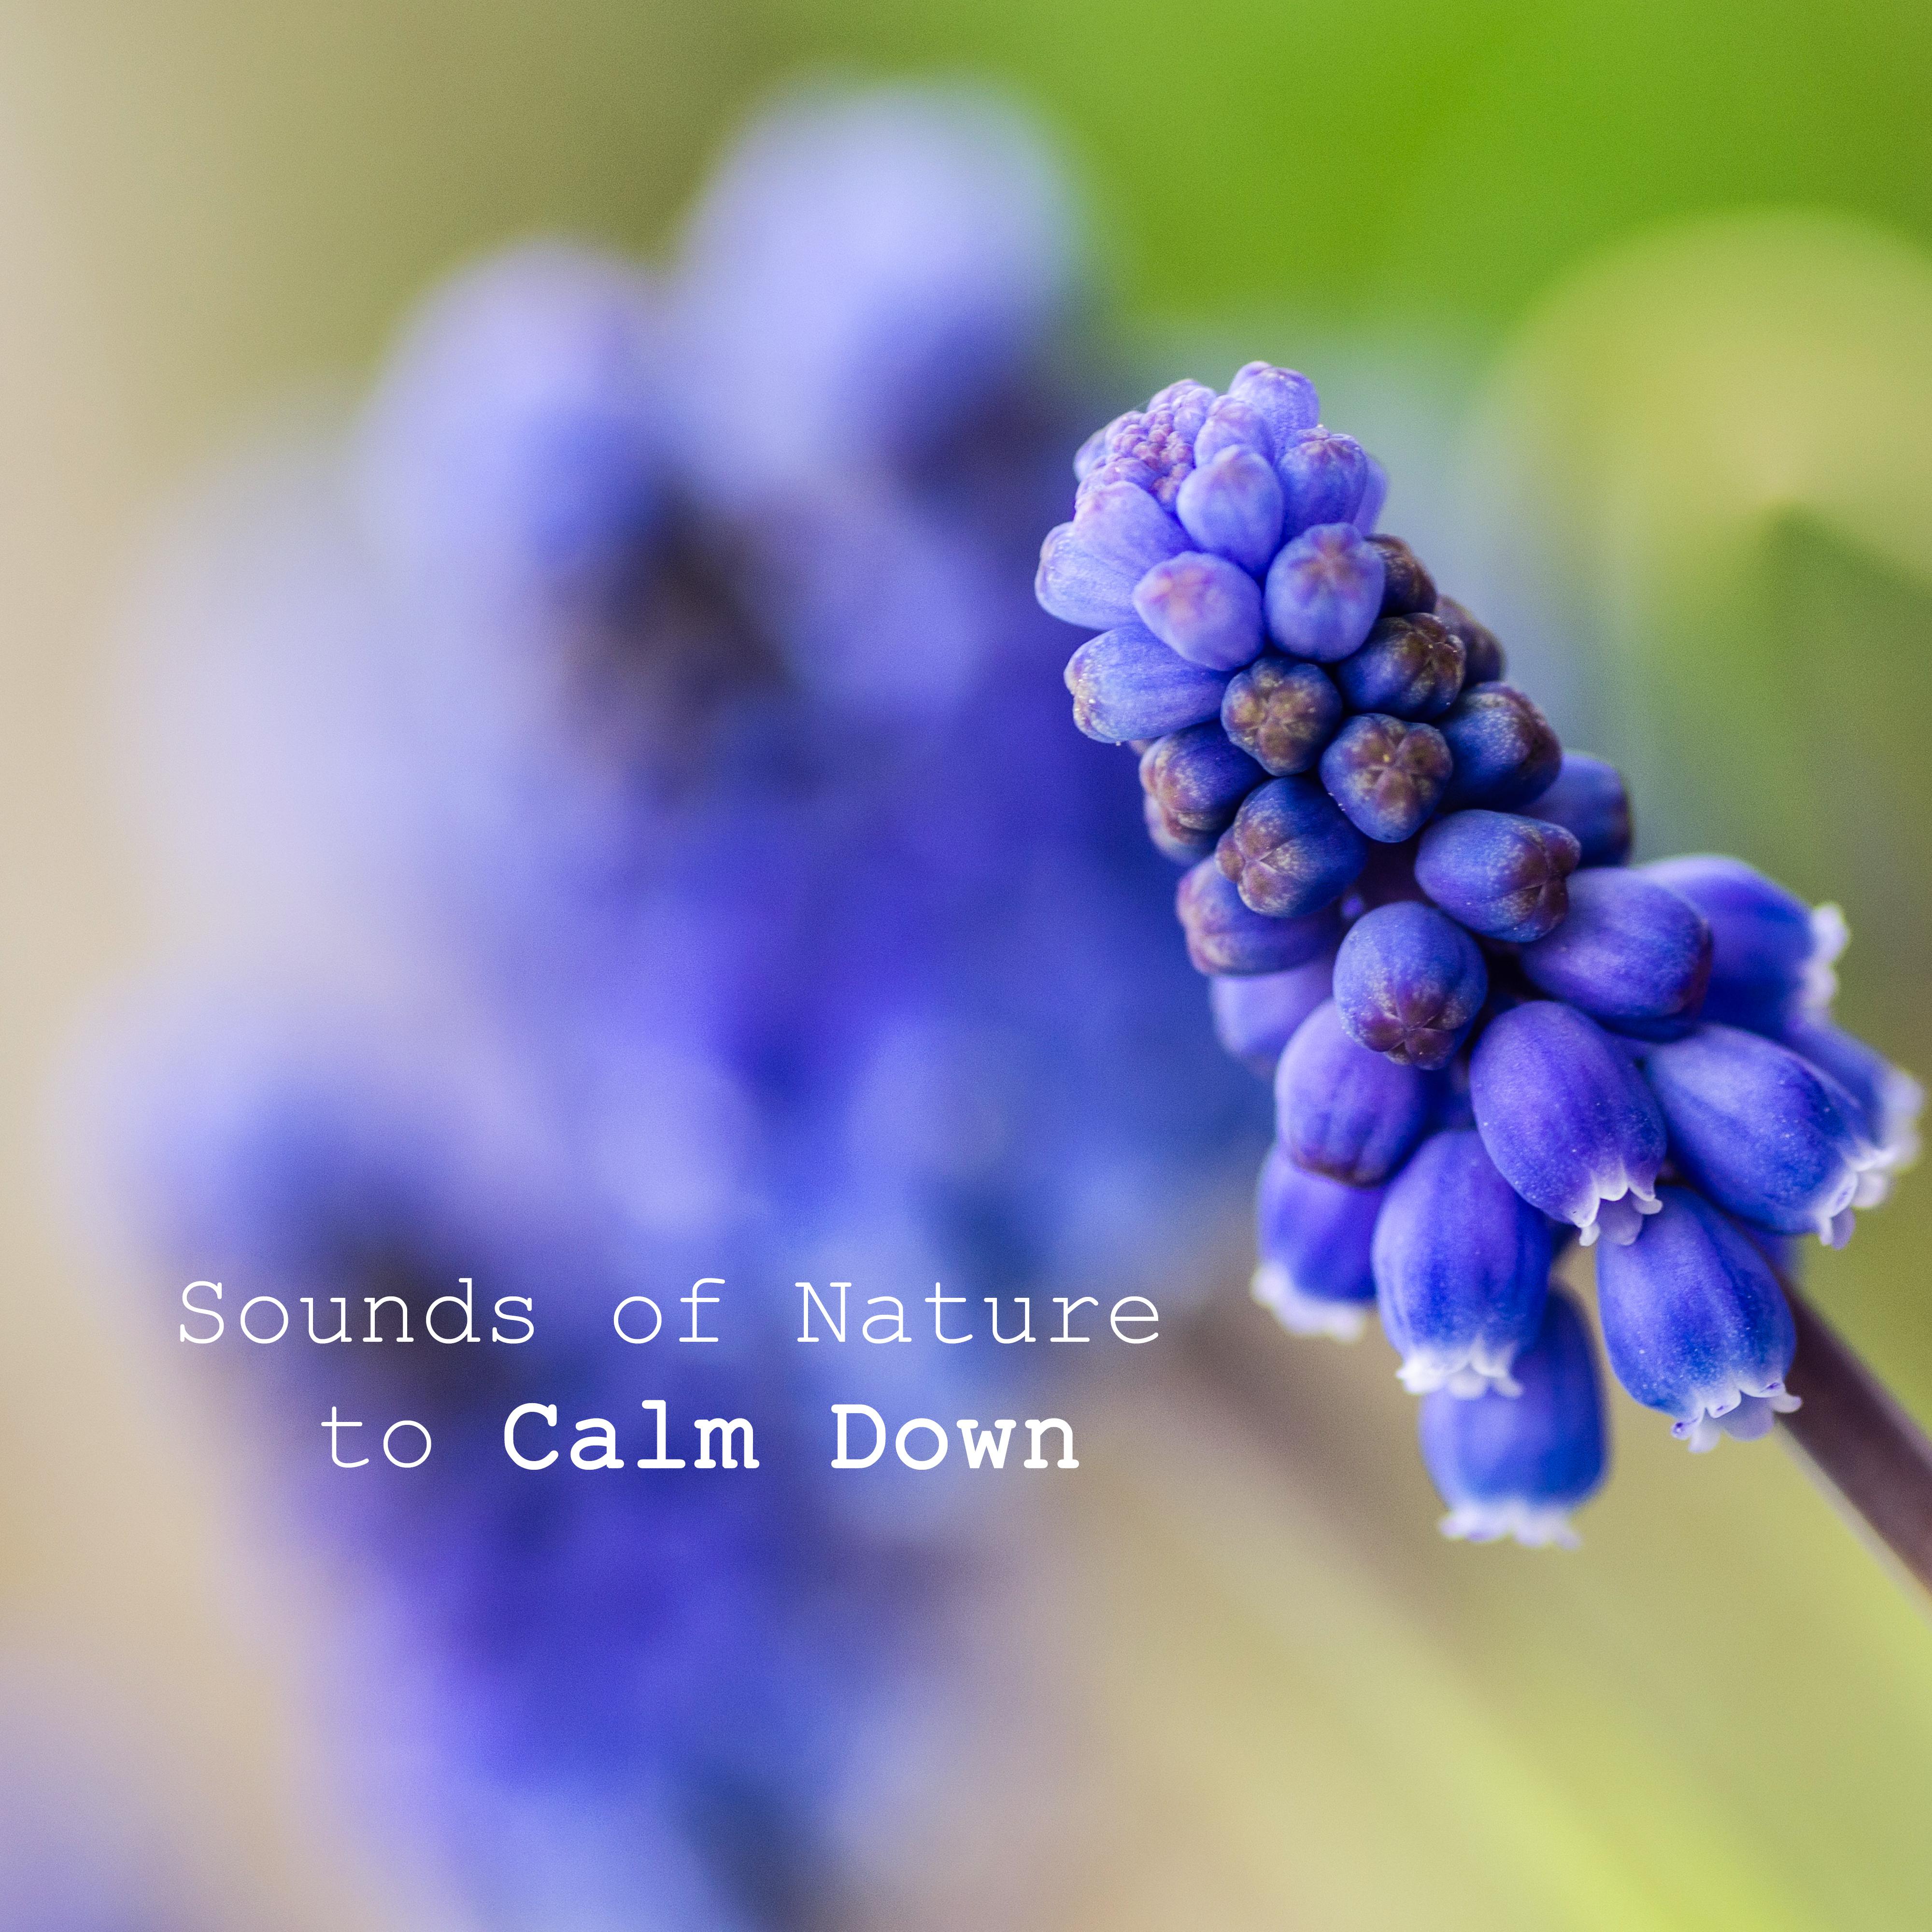 Sounds of Nature to Calm Down – Peaceful Music, Healing Songs, Anti Stress Music, Pure Relaxation, Soothing Piano, Sounds of Birds, Relaxing Waves